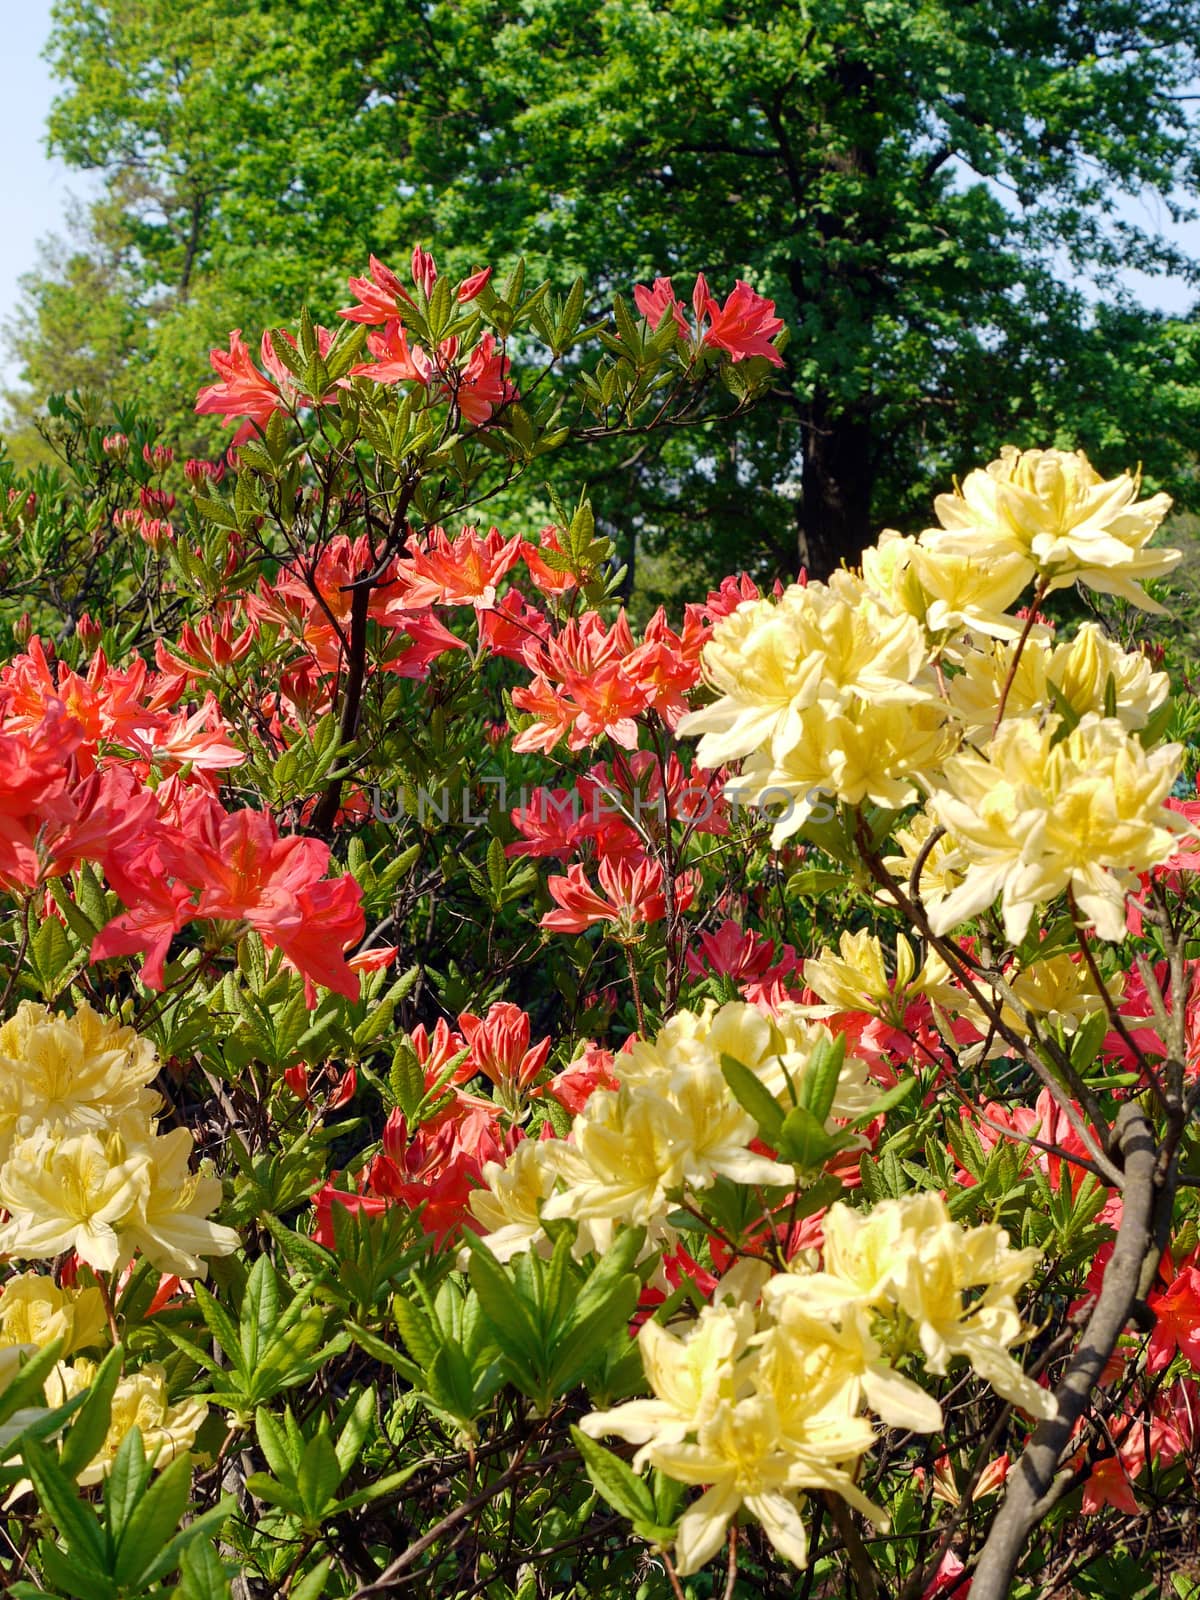 Wonderful red and yellow blossoming petals of flowers with green leaves against the background of tall trees